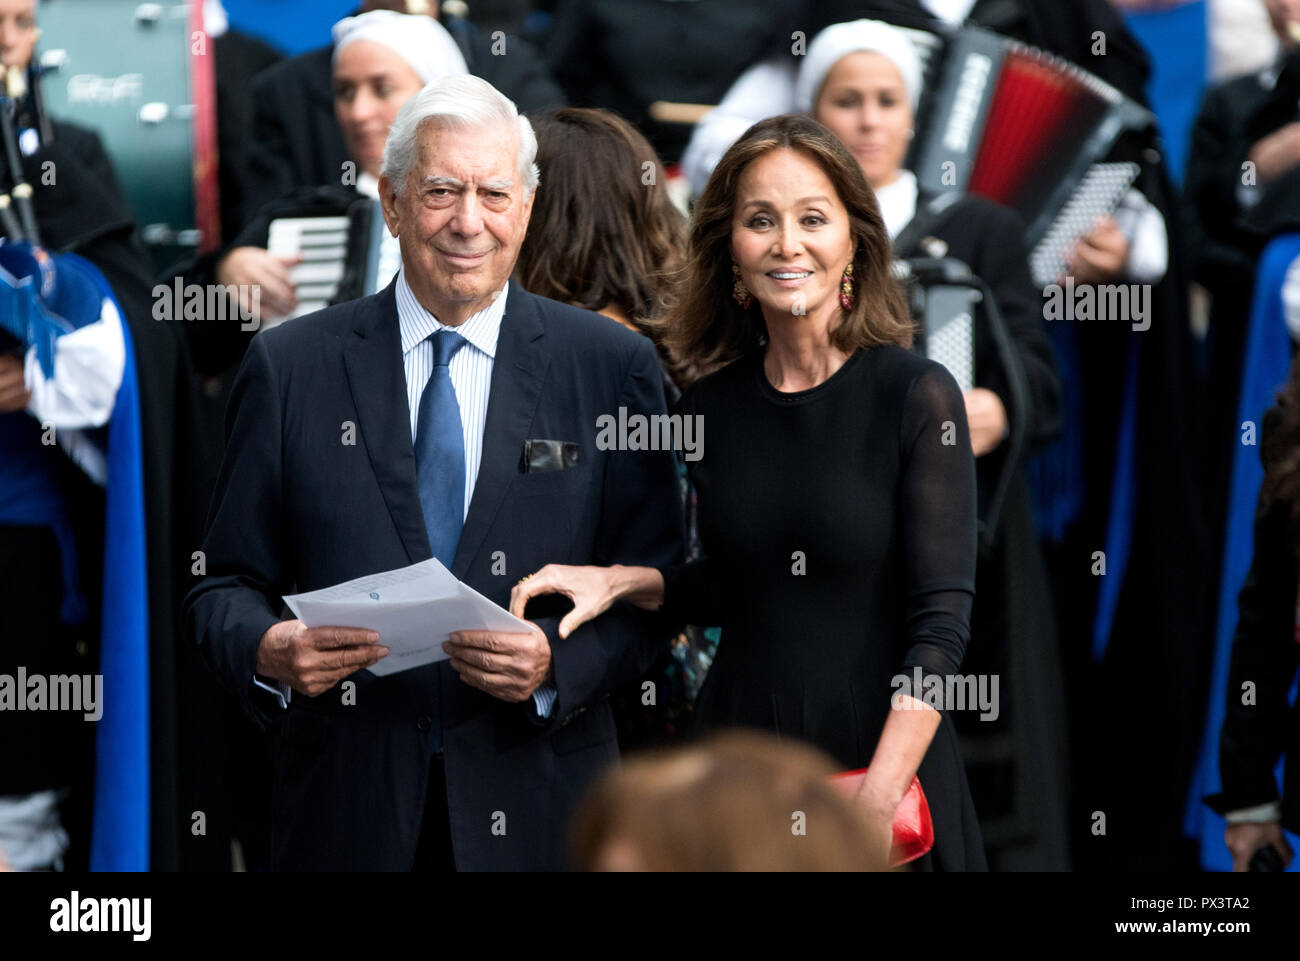 Oviedo, Spain. 19th October, 2018. Peruvian writer Mario Vargas LLosa and Filipina socialite Isabel Preysler, arrive to the ceremony of Princess of Asturias Awards at Campoamor Theatre on October 19, 2018 in Oviedo, Spain. ©David Gato/Alamy Live News Stock Photo